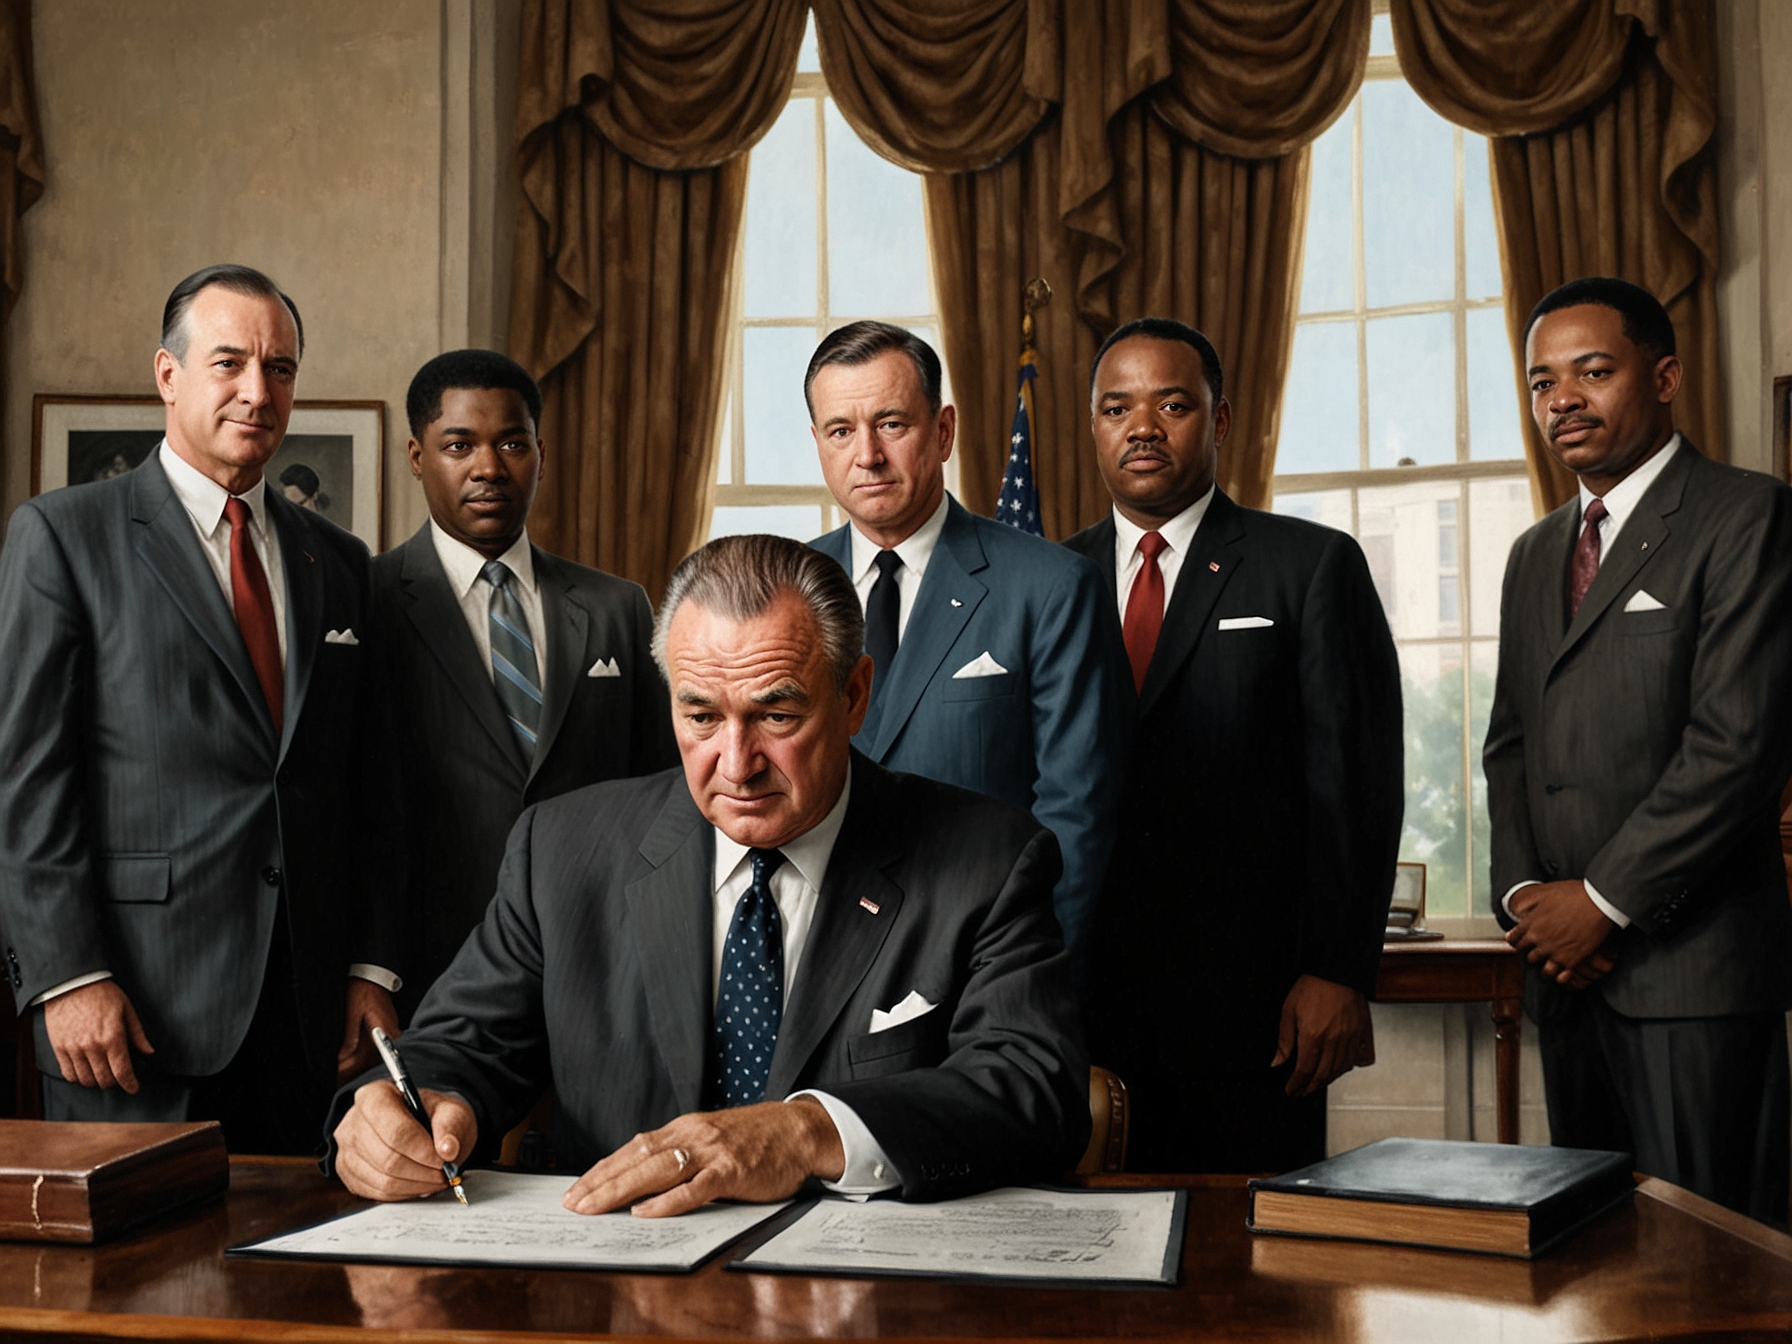 A portrayal of President Lyndon B. Johnson signing the Civil Rights Act of 1964 on July 2, with civil rights leaders like Dr. Martin Luther King Jr. witnessing the historic legislation aimed at ending racial segregation and discrimination.